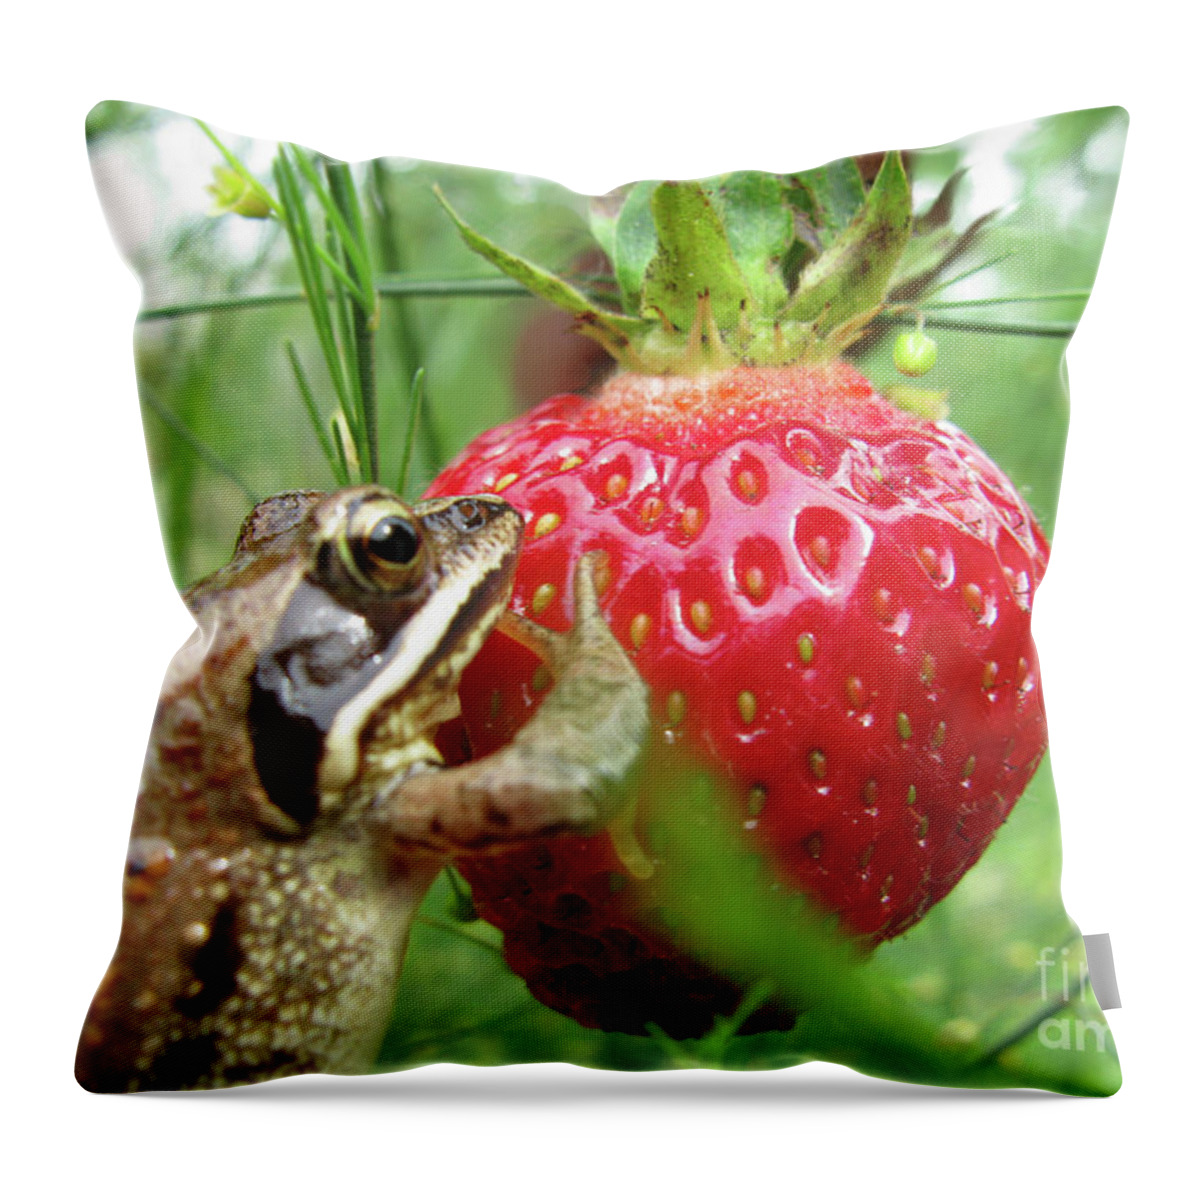 Frog Throw Pillow featuring the photograph Frogs Love Strawberries Too by Ausra Huntington nee Paulauskaite